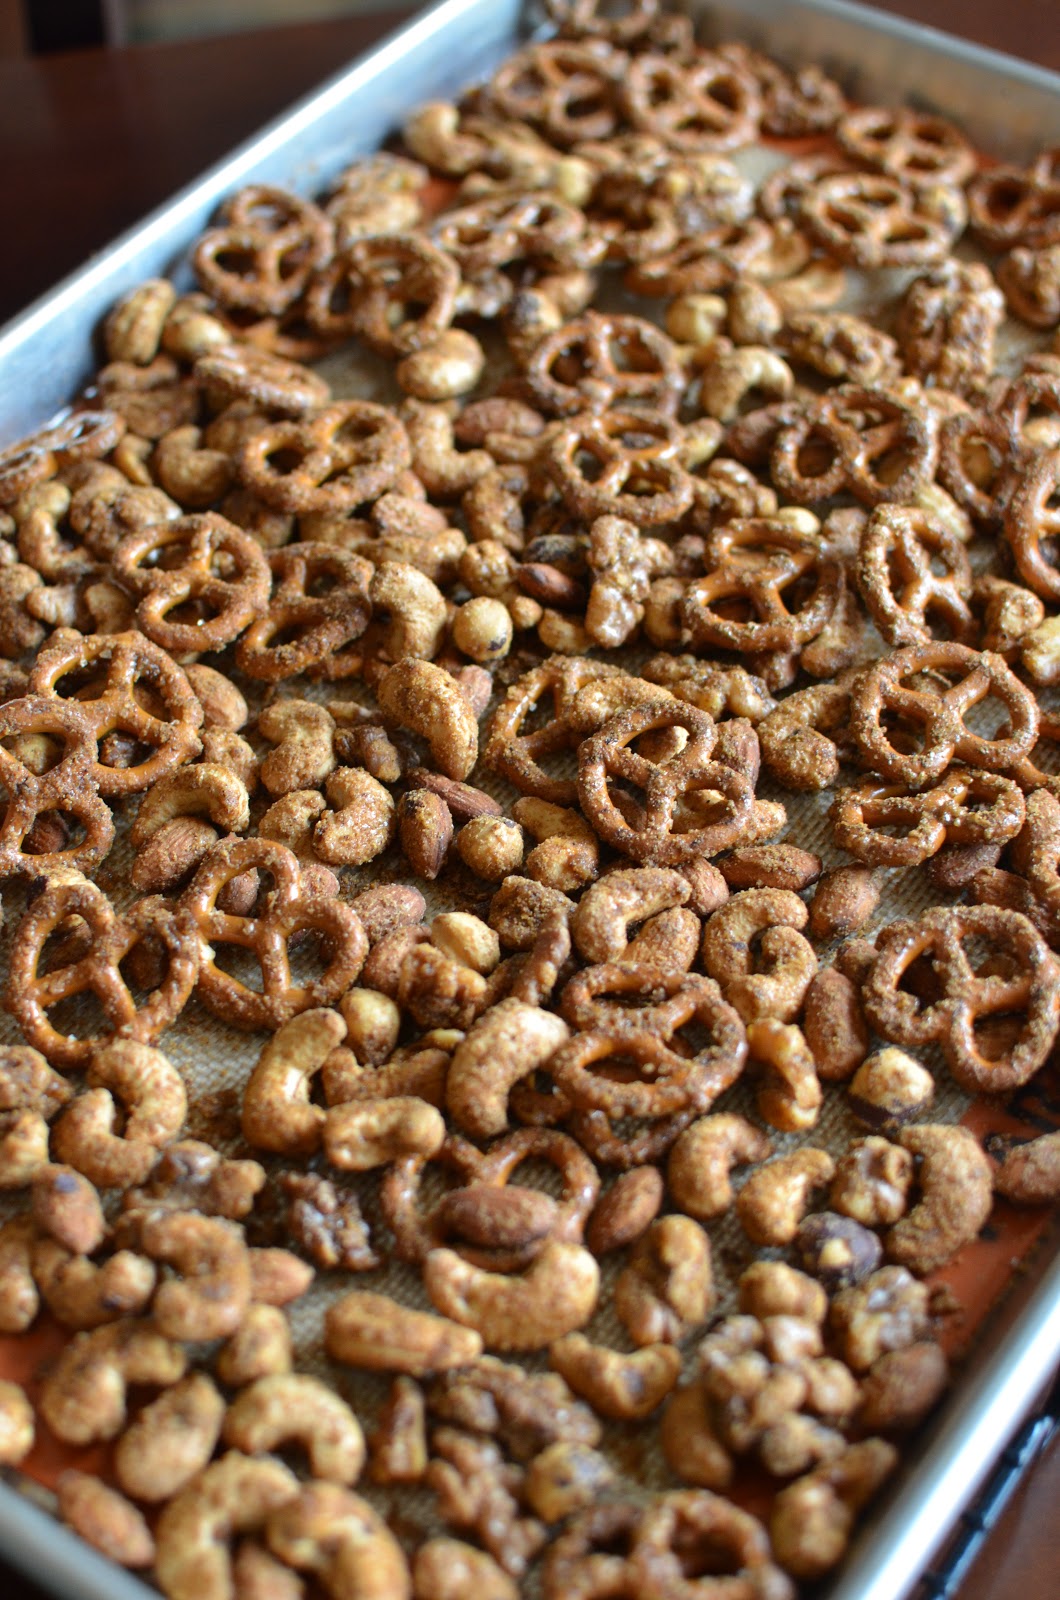 Playing with Flour: Holiday snack mix - spiced, glazed nuts & pretzels